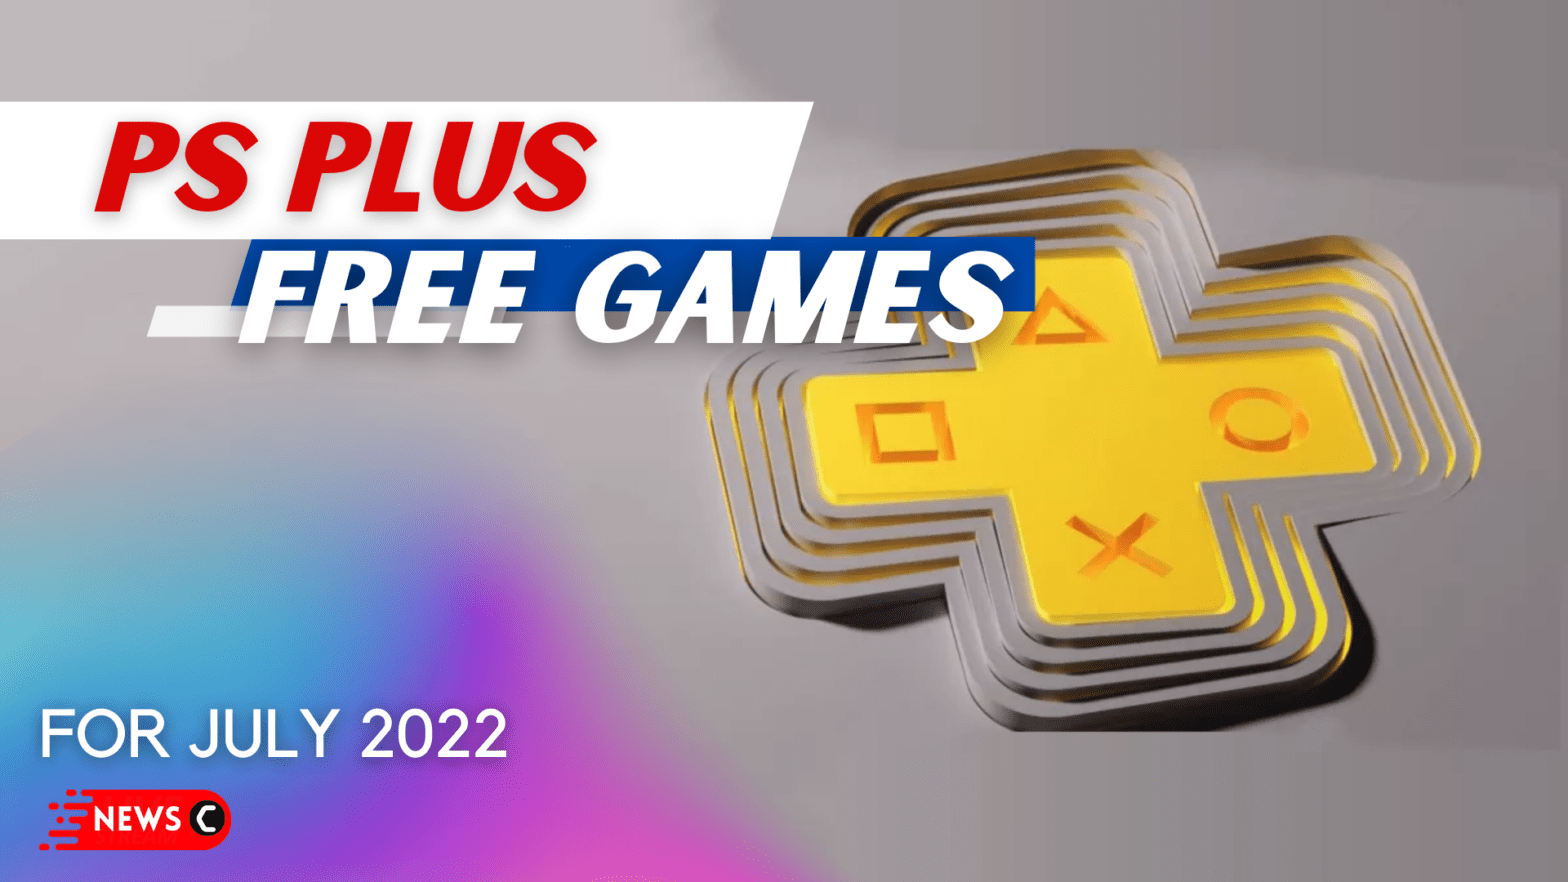 PS Plus Free Games for July 2022